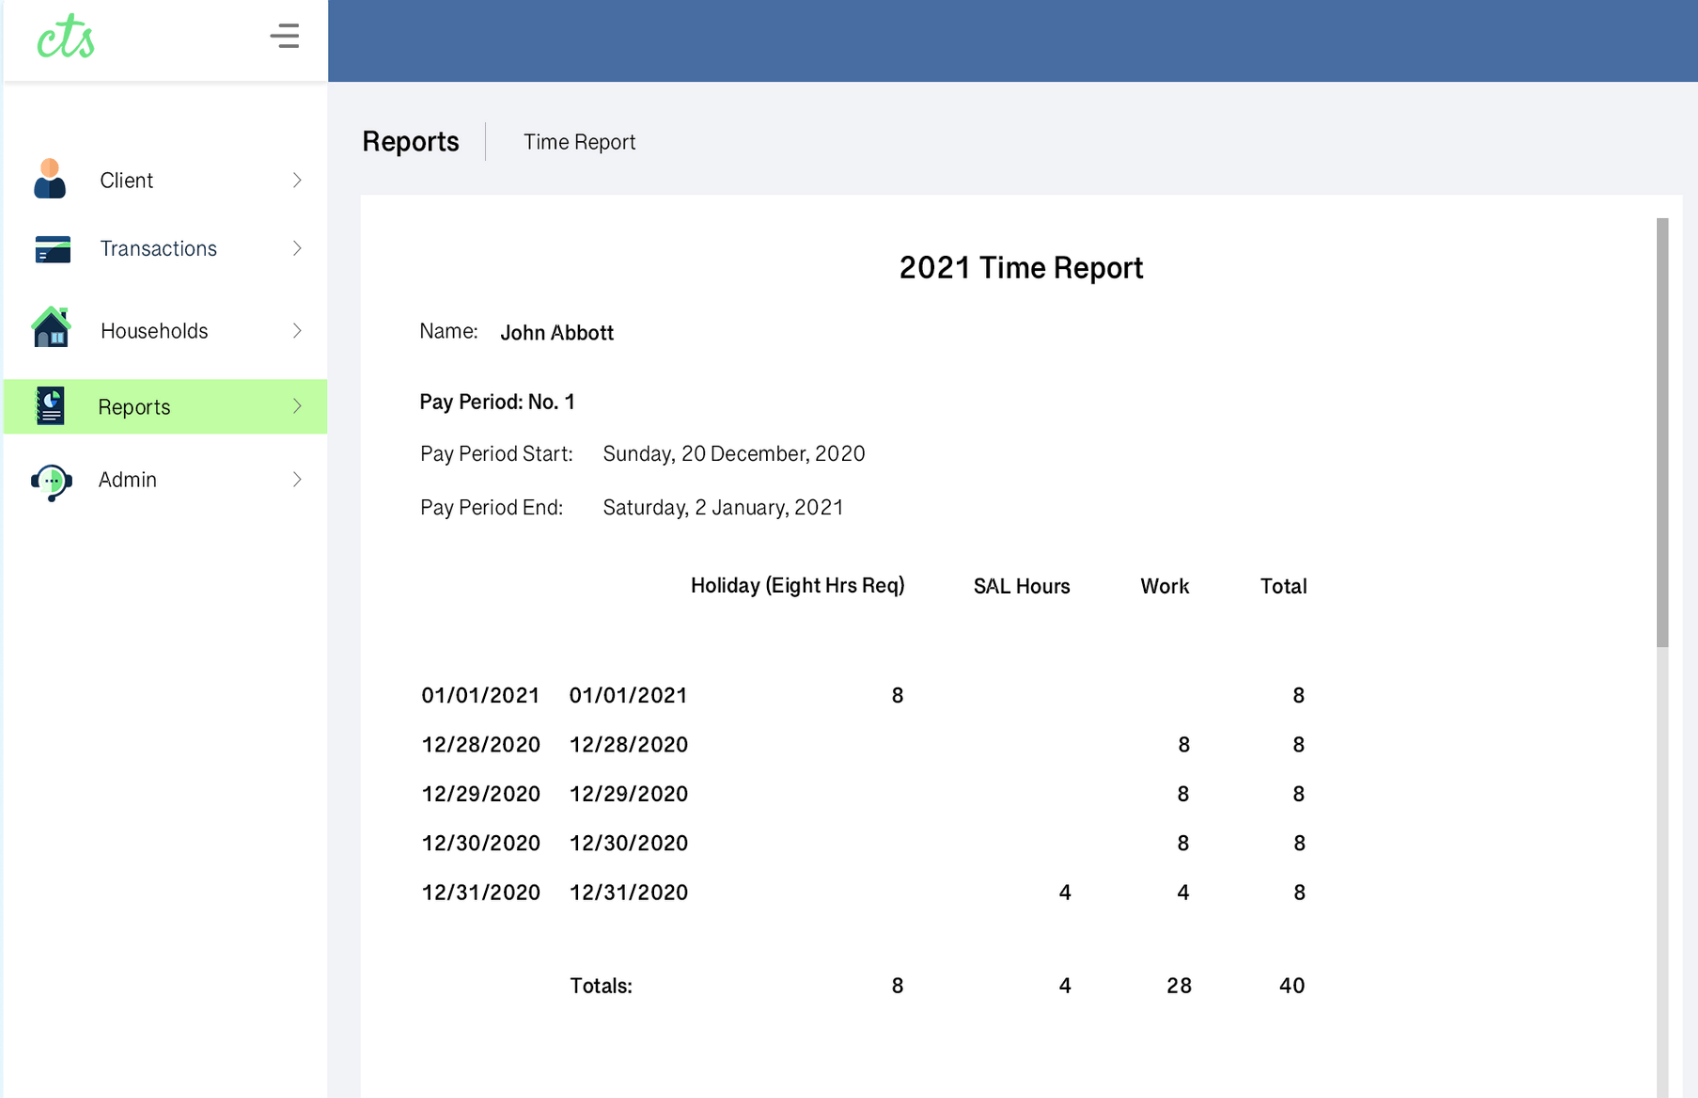 Our report library represents most scenarios needed by our clients, but in the event you need custom reports set up, we offer that as well!